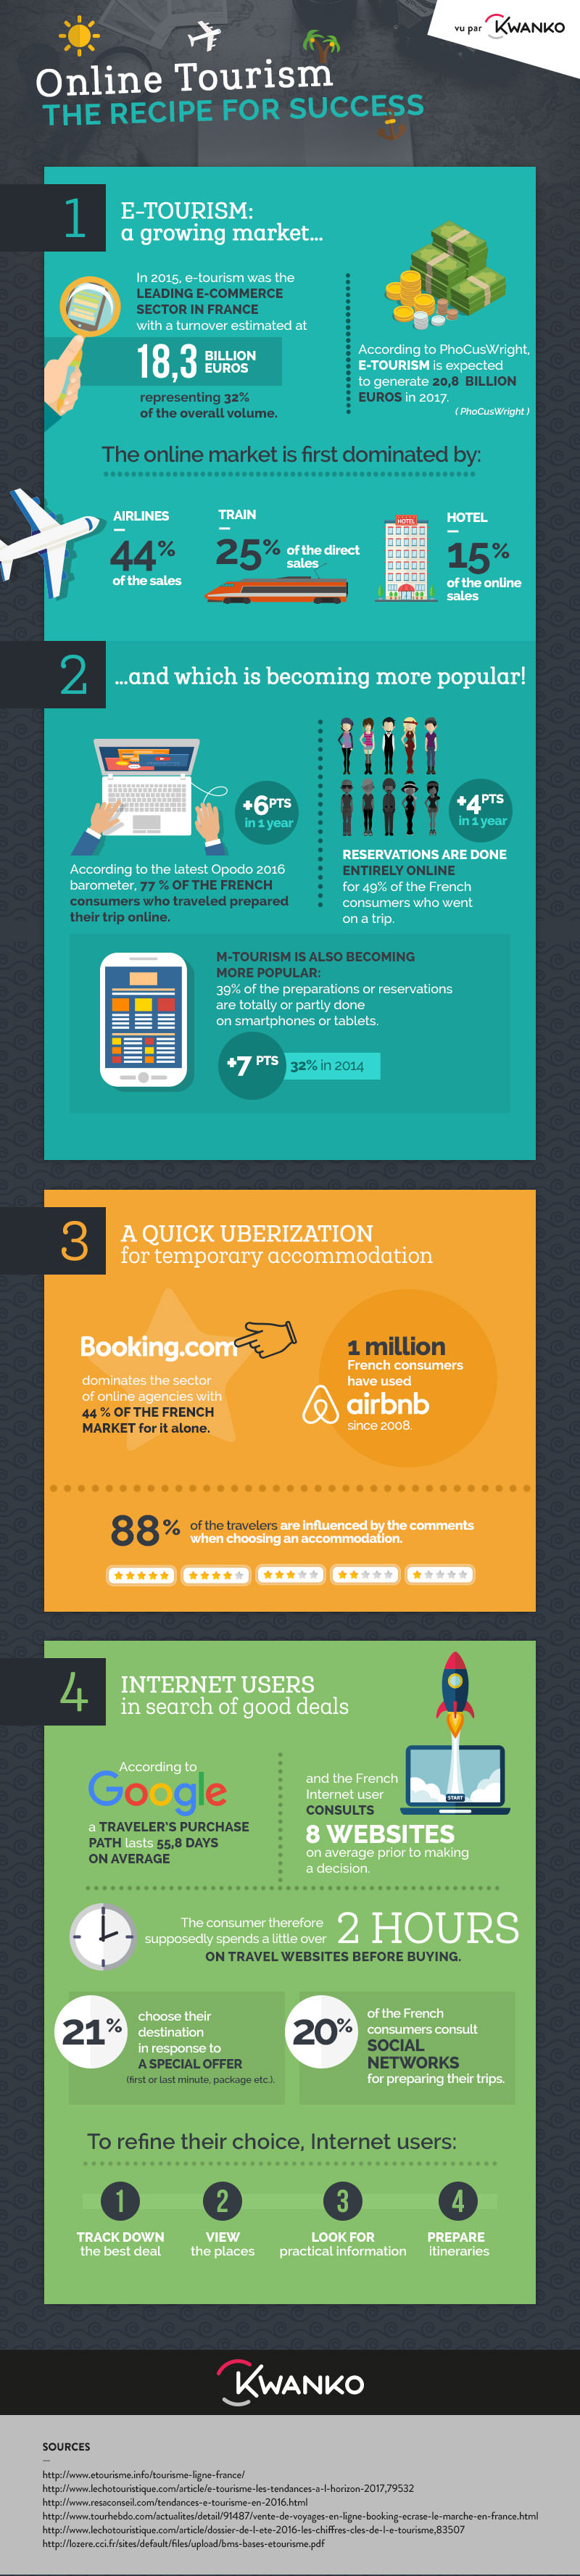 Online Tourism Infographic